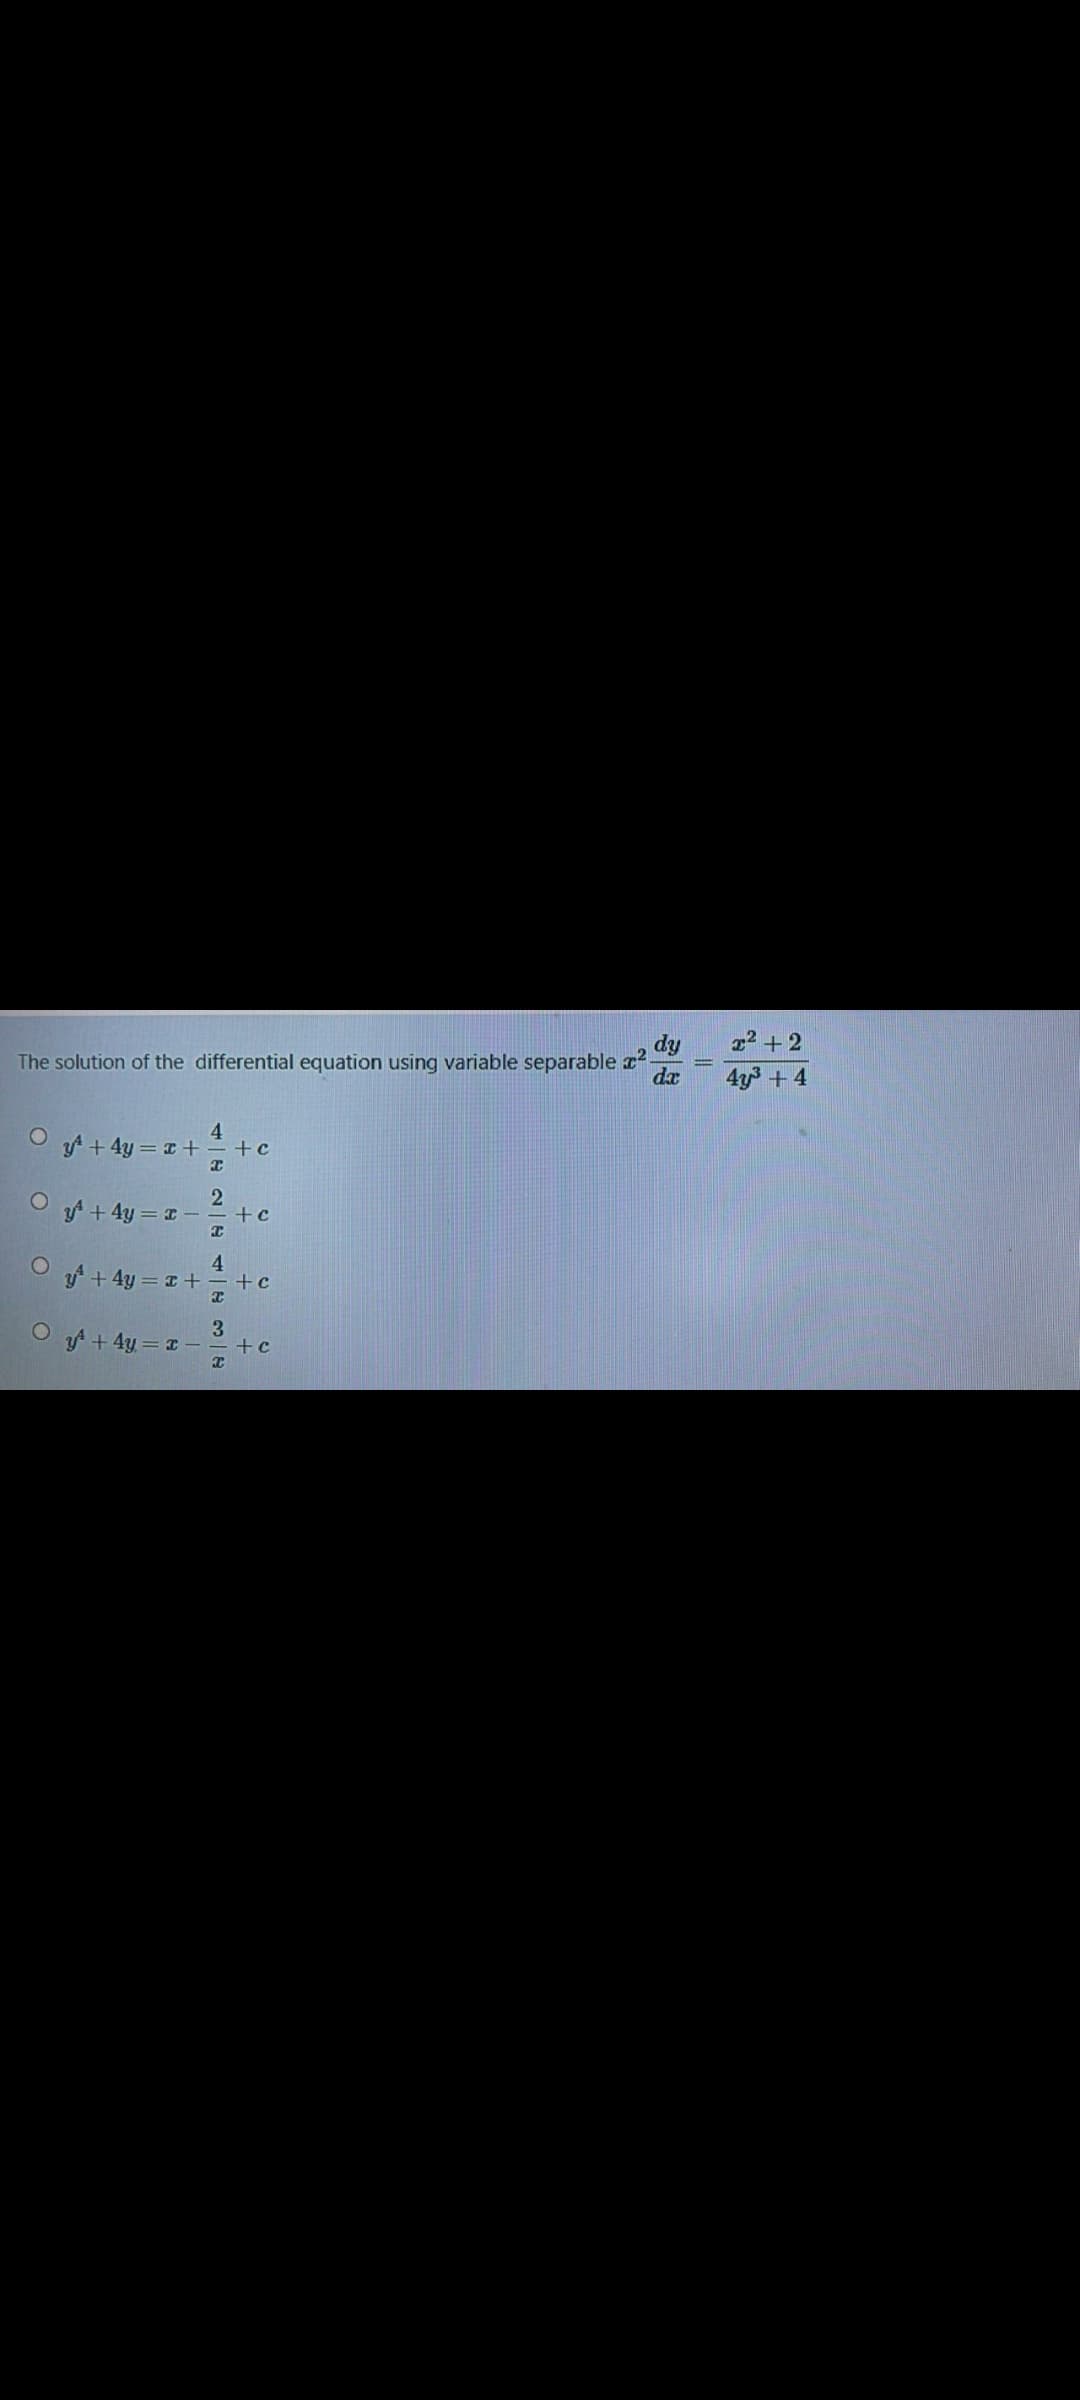 z2 + 2
dy
The solution of the differential equation using variable separable z2
da
4y3 + 4
4.
O A+ 4y = I+=+c
O 4 + 4y = I -=+c
4.
O + 4y = 1 +
+c
O f + 4y = 1
3.
+c
